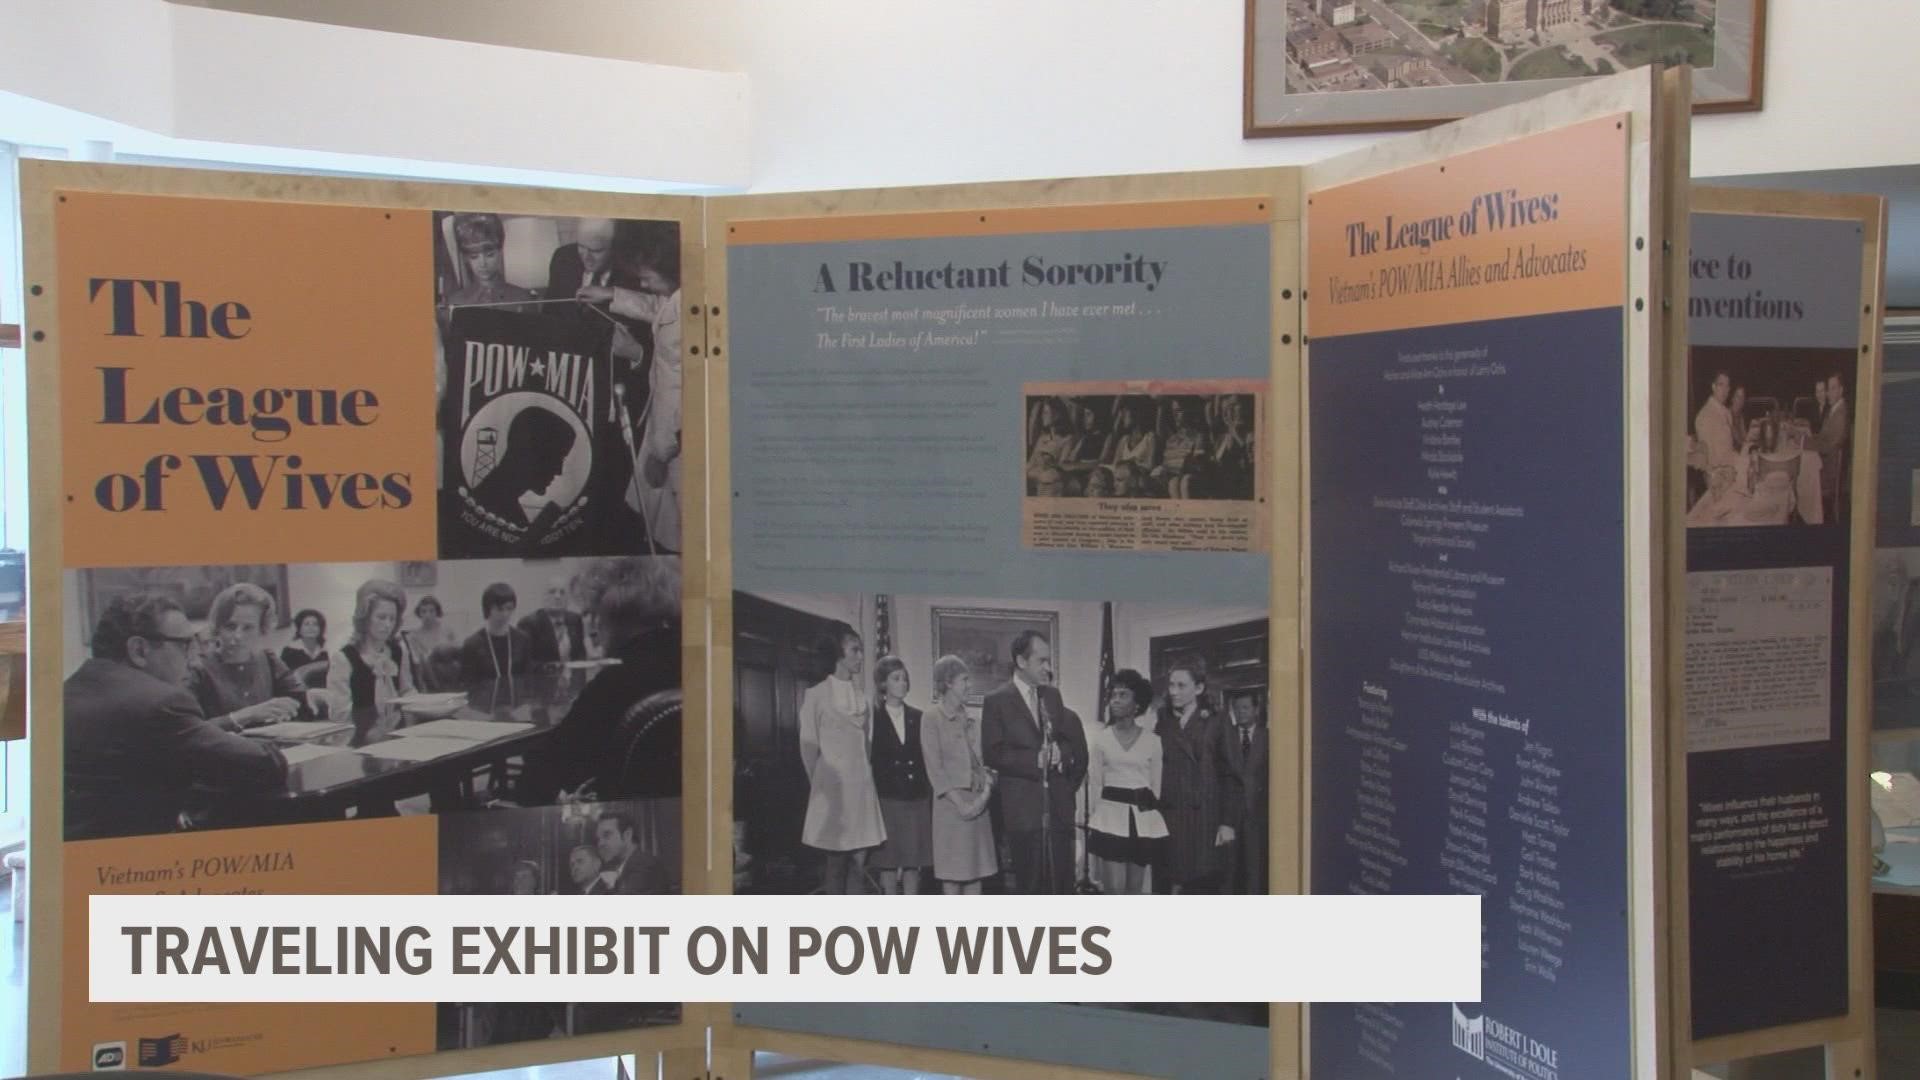 Iowa Gold Star Military Museum is hosting an exhibit highlighting the efforts of POW/MIA Wives.